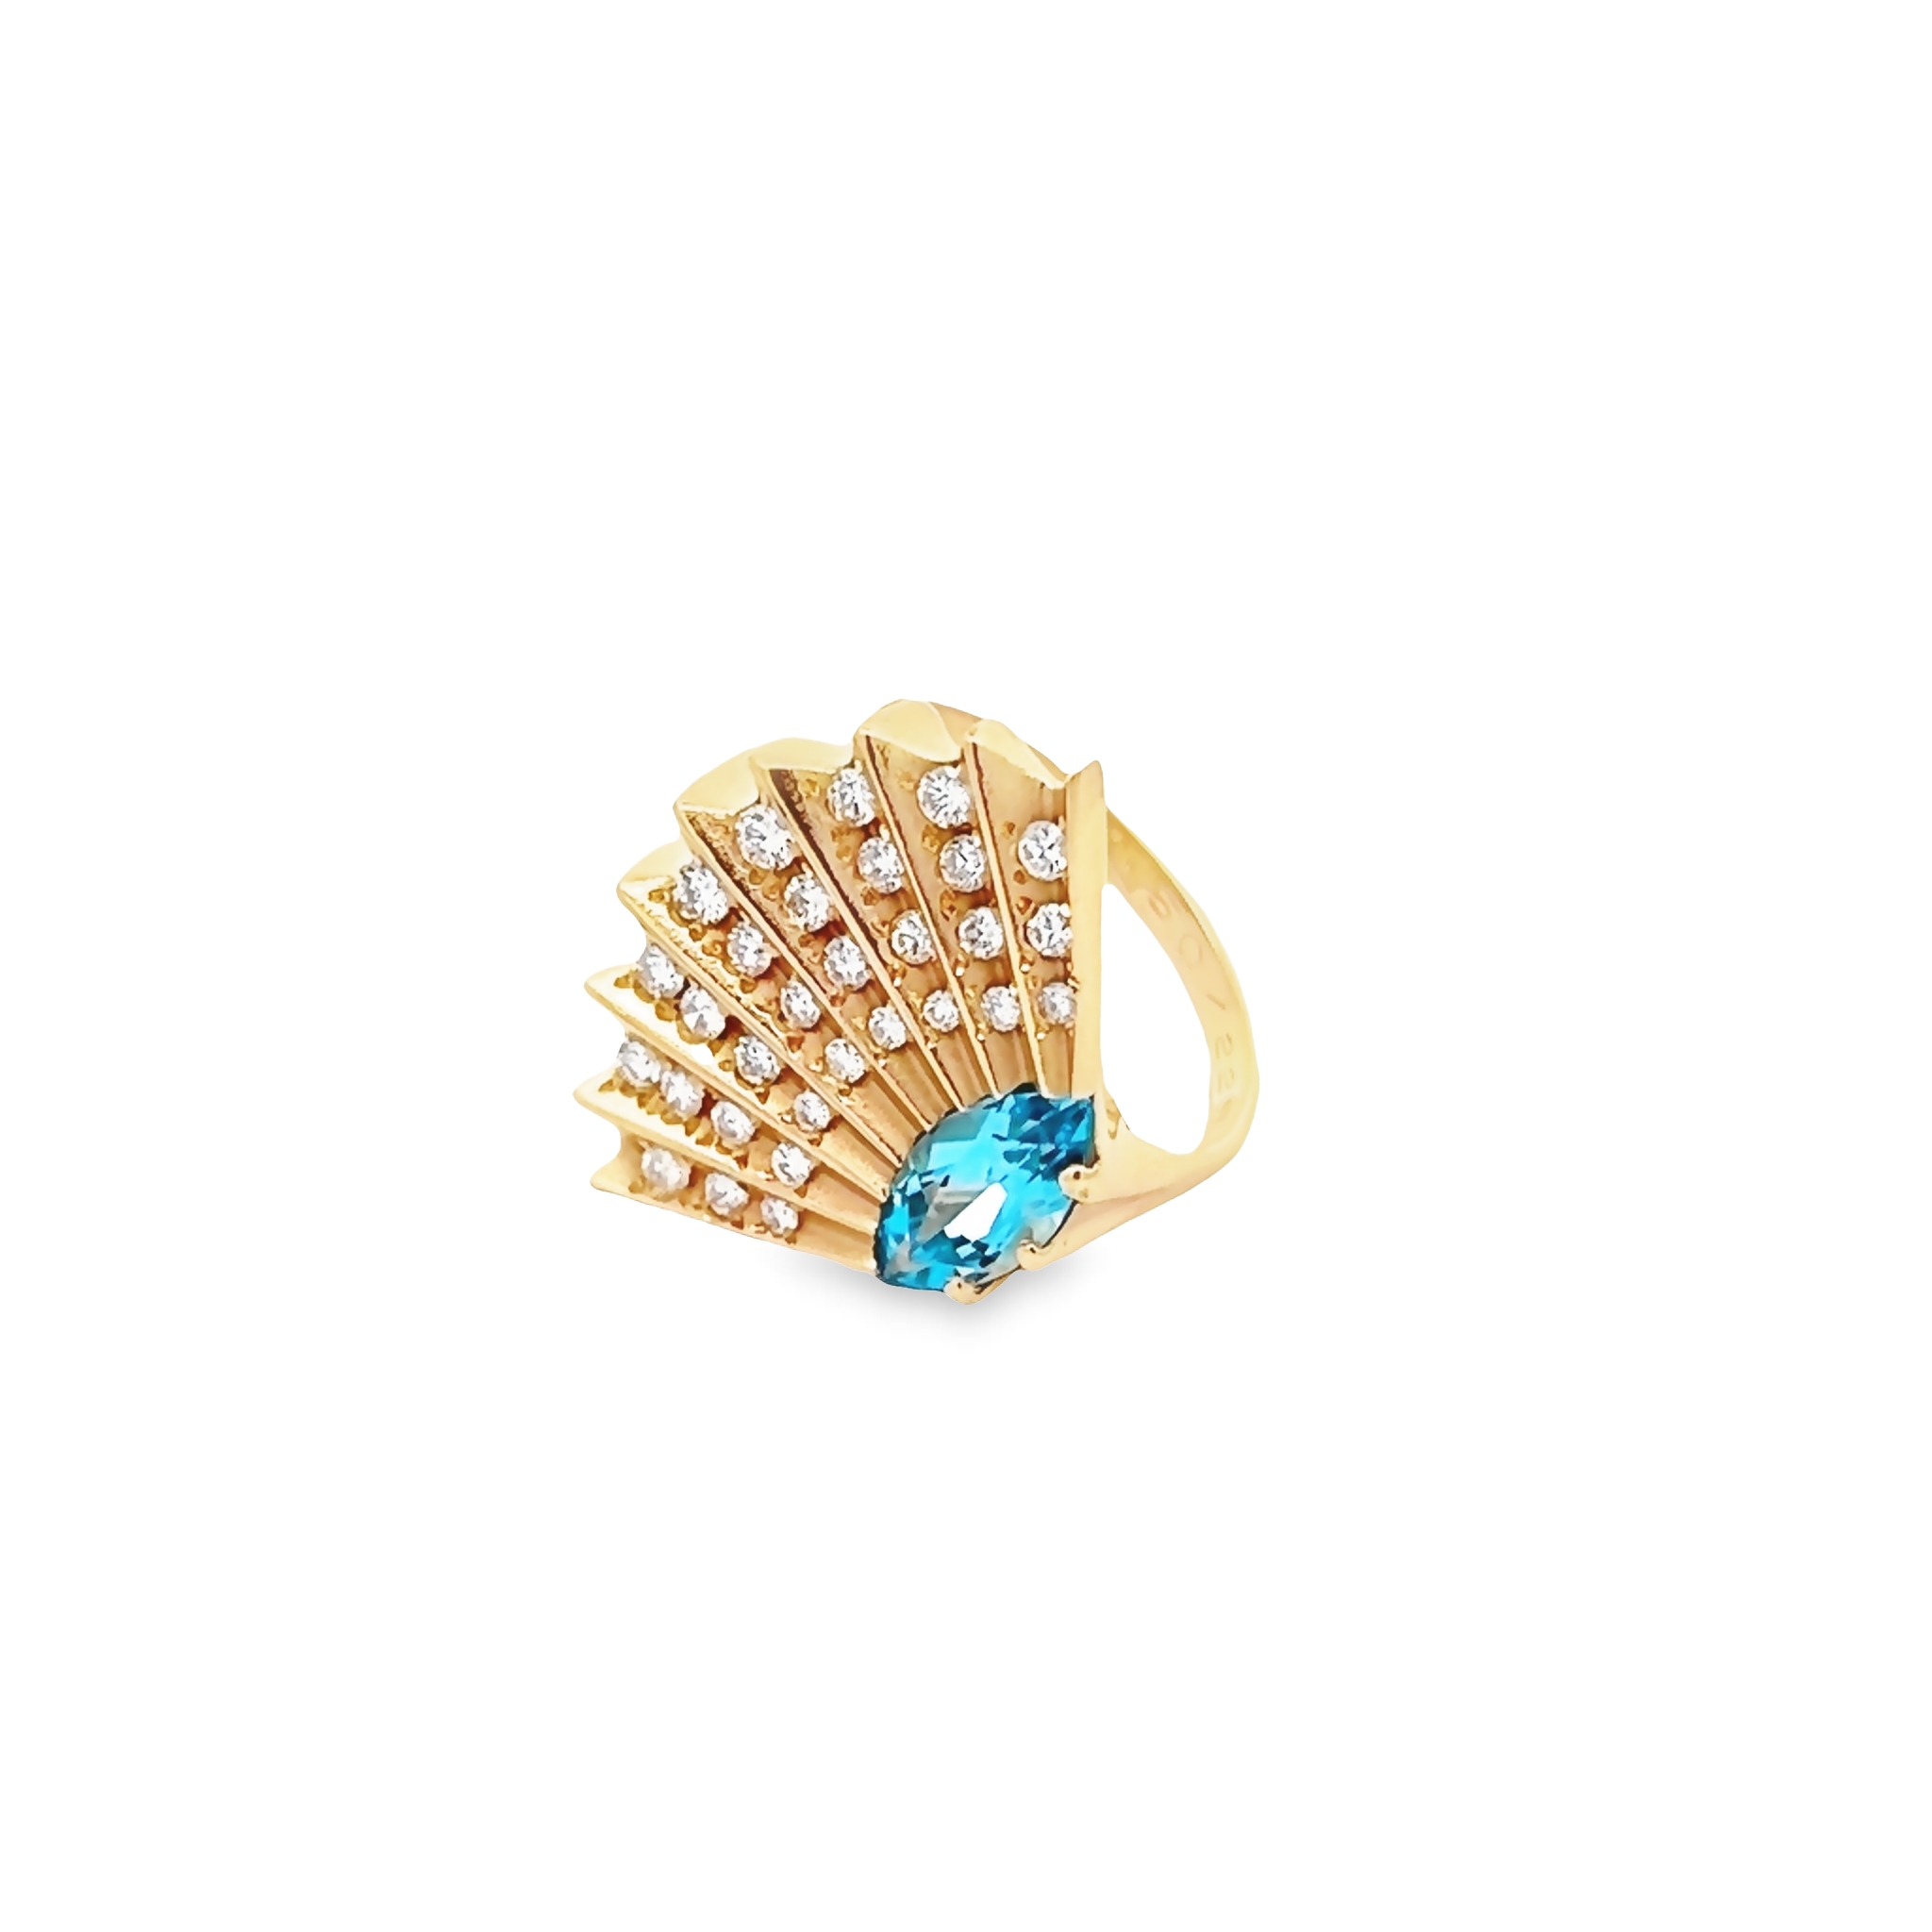 14k Yellow Gold Blue Topaz Fashion Ring With Diamond Accents